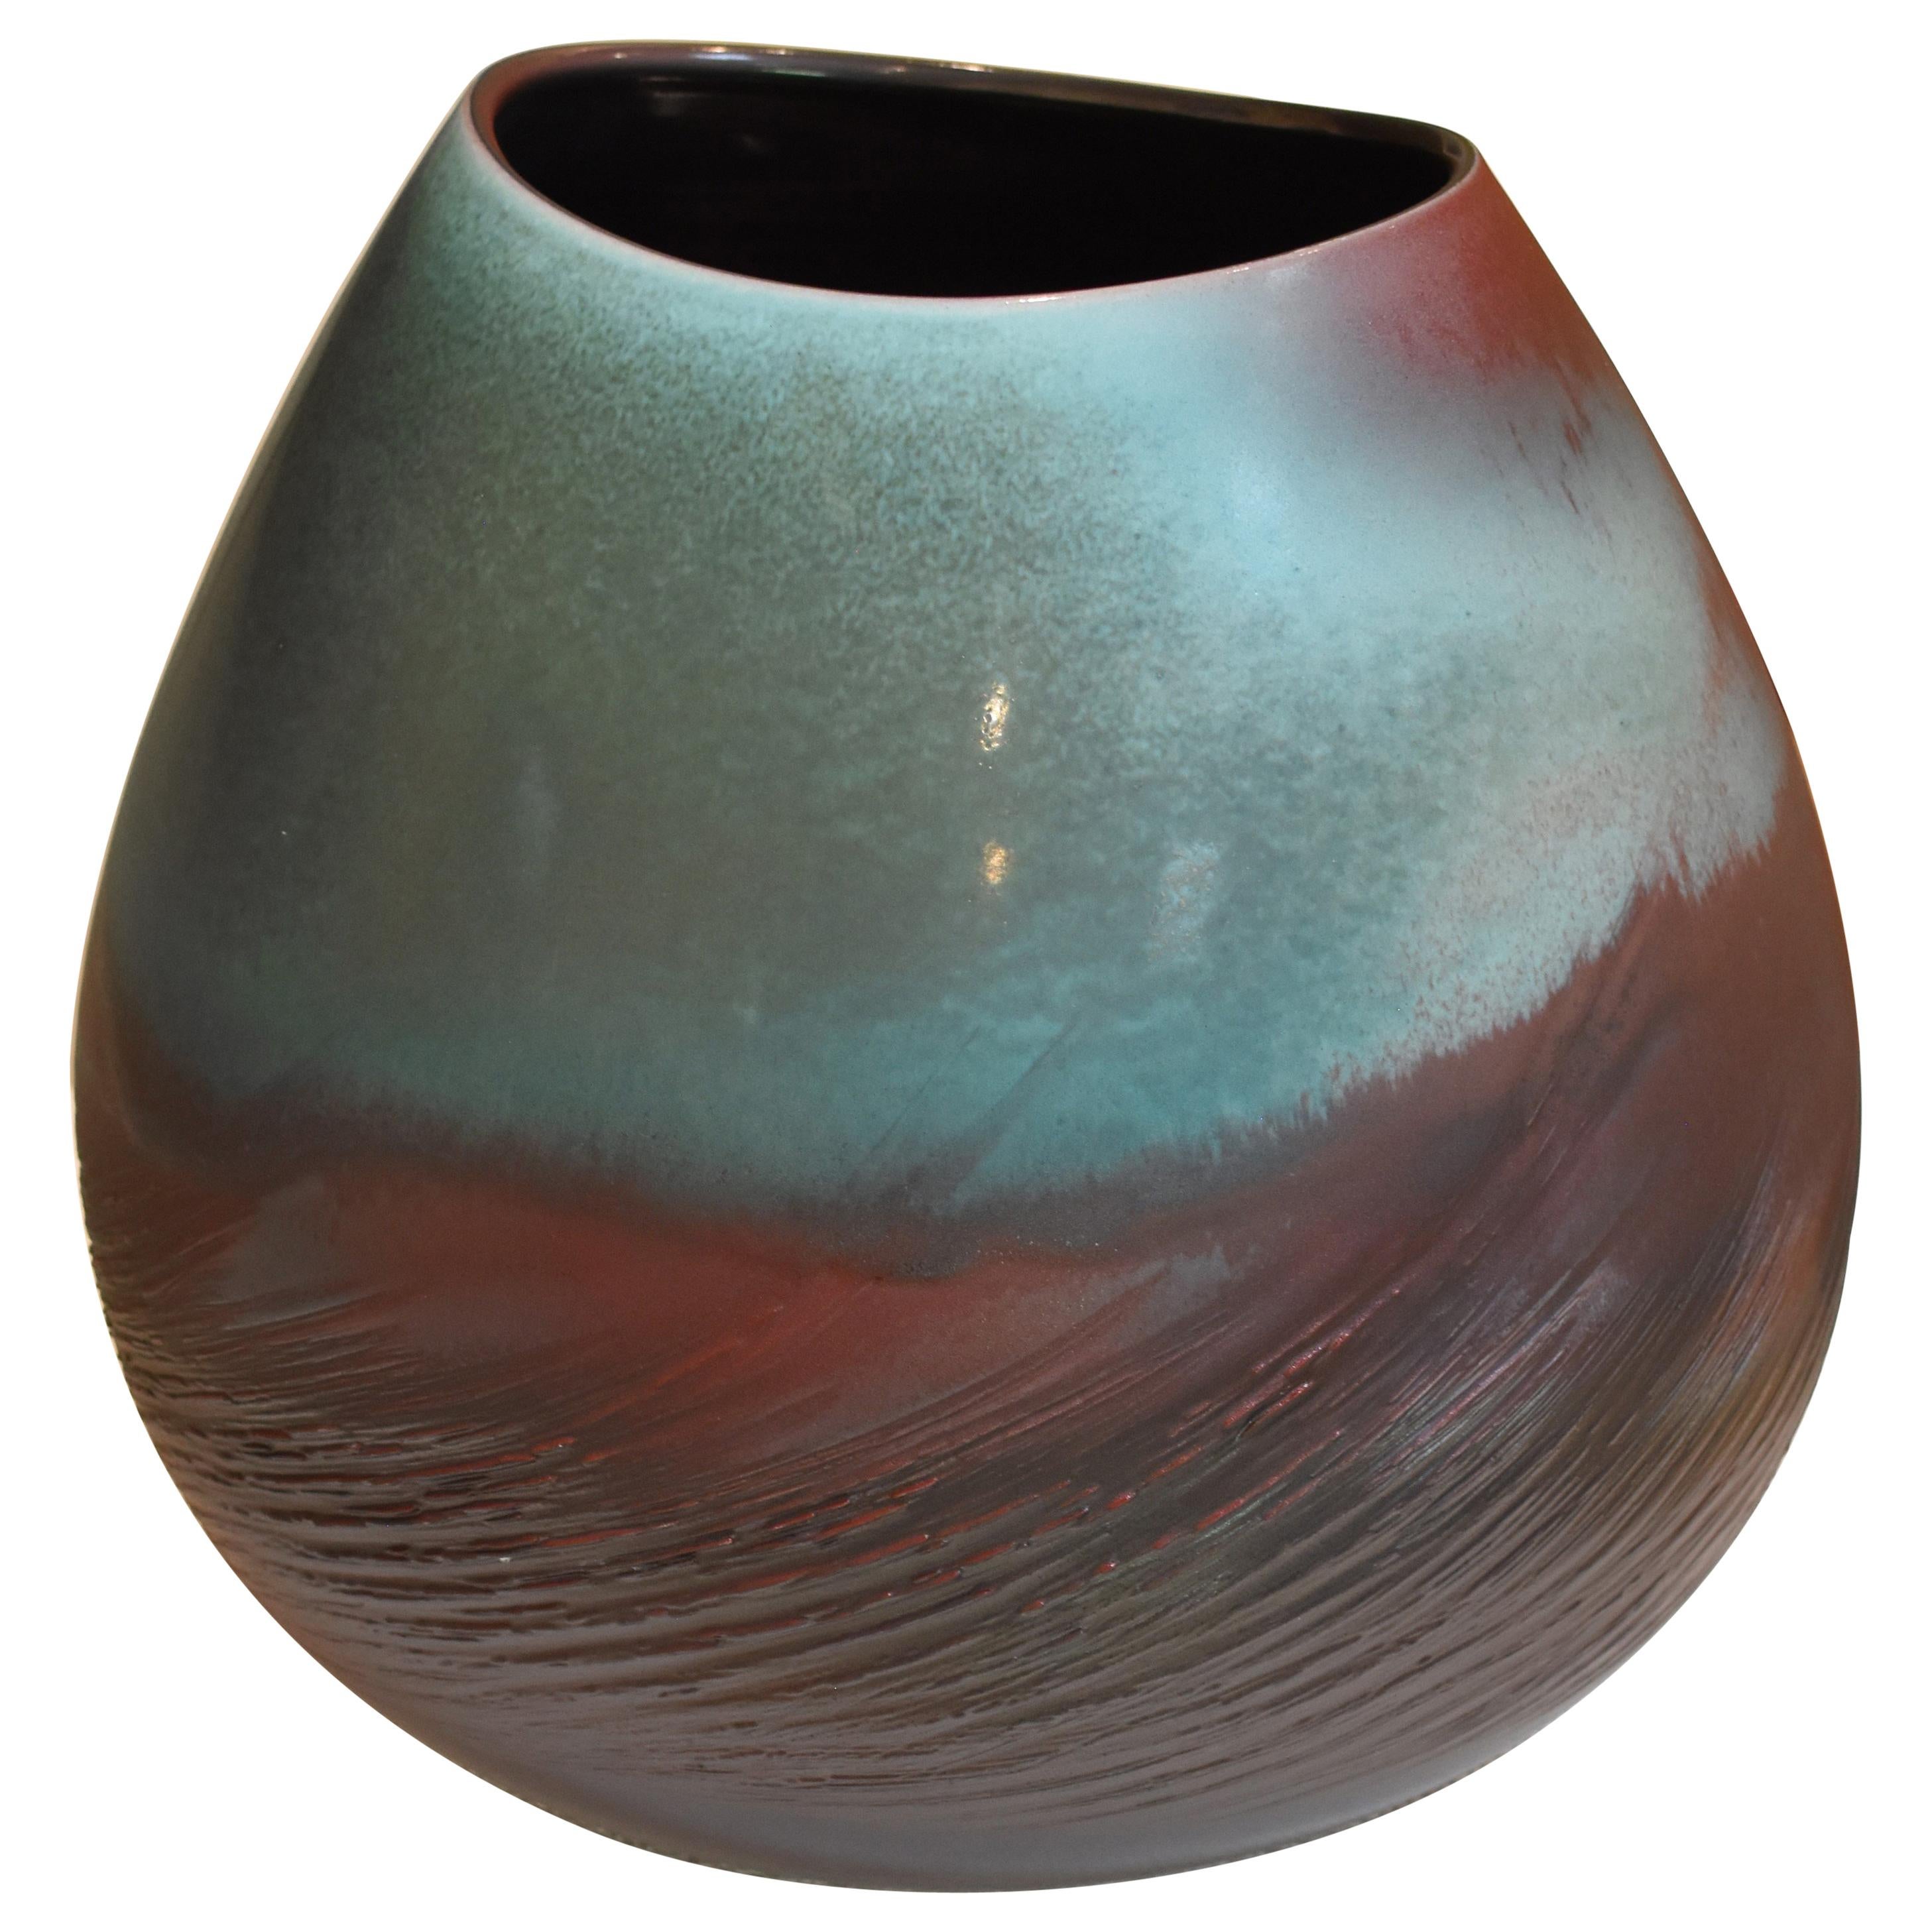 Extraordinary Jpanese contemporary highly collectible hand-glazed decorative porcelain vase, a museum quality exhibition piece hand-glazed in iron red/brown and turquoise blue on a strikingly shaped body, an award-winning exhibition masterpiece by